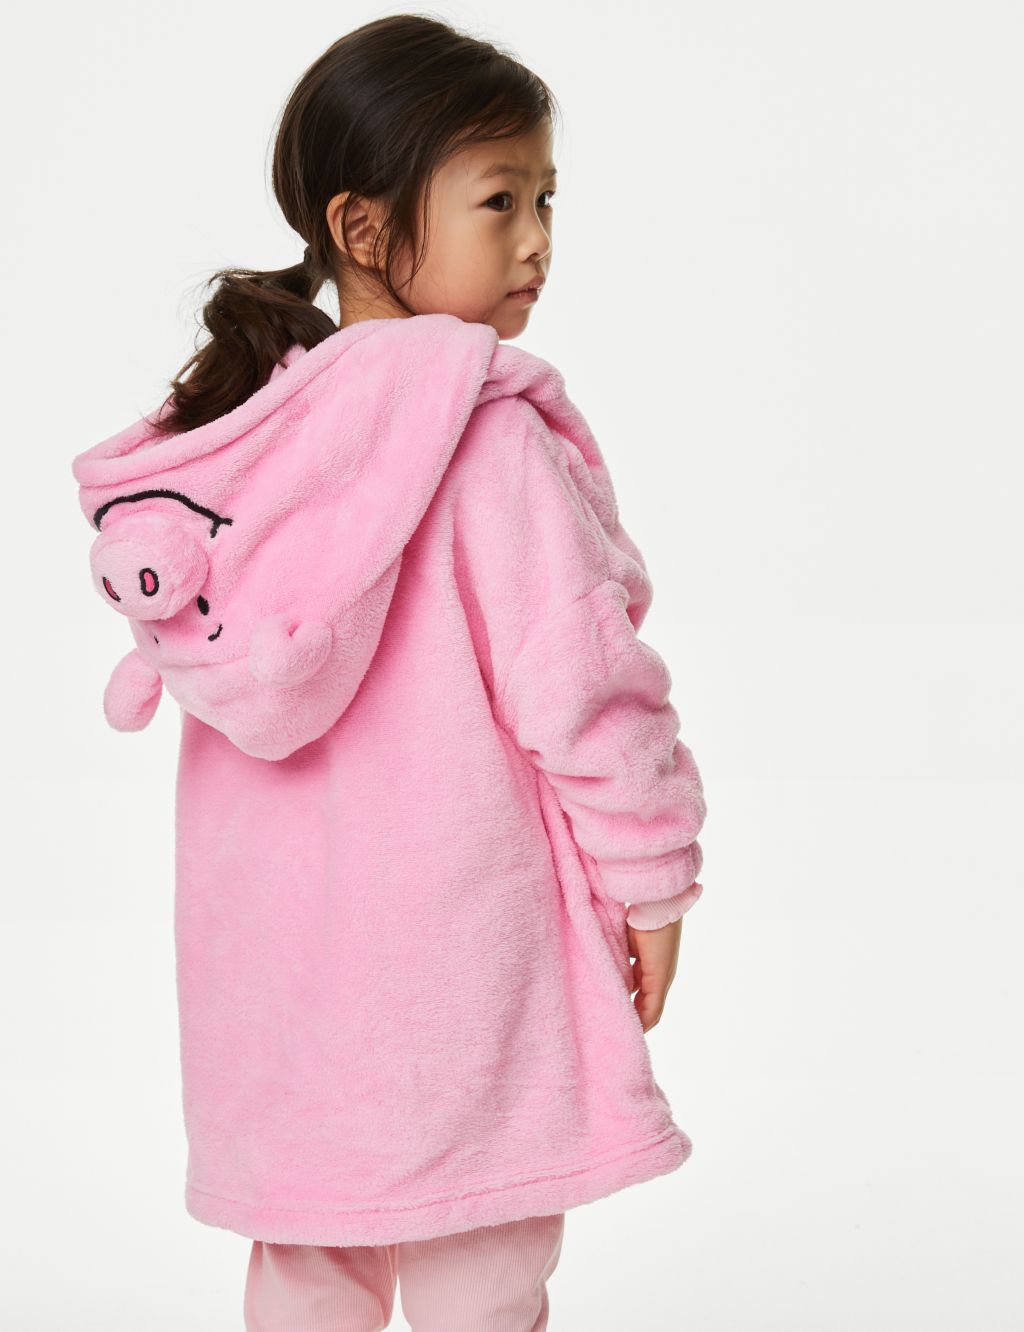 Novelty Percy Pig™ Foldable Hoodie (3-16 Yrs) image 5